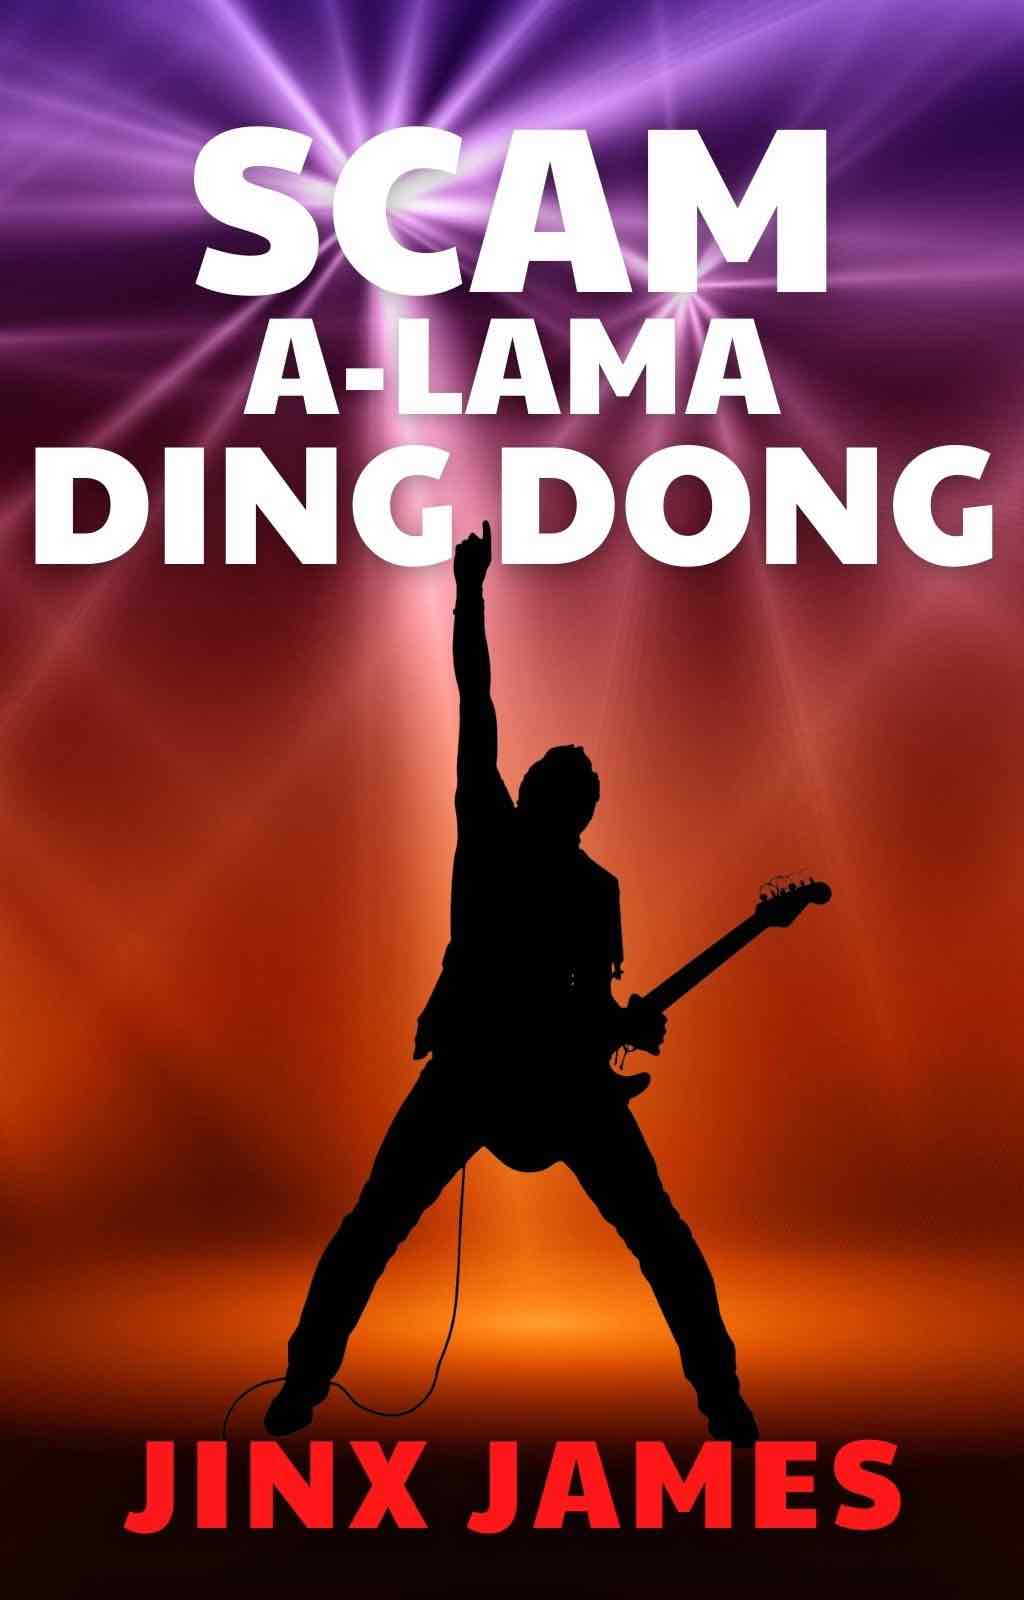 SCAM A-LAMA DING DONG BOOK COVER JINX JAMES